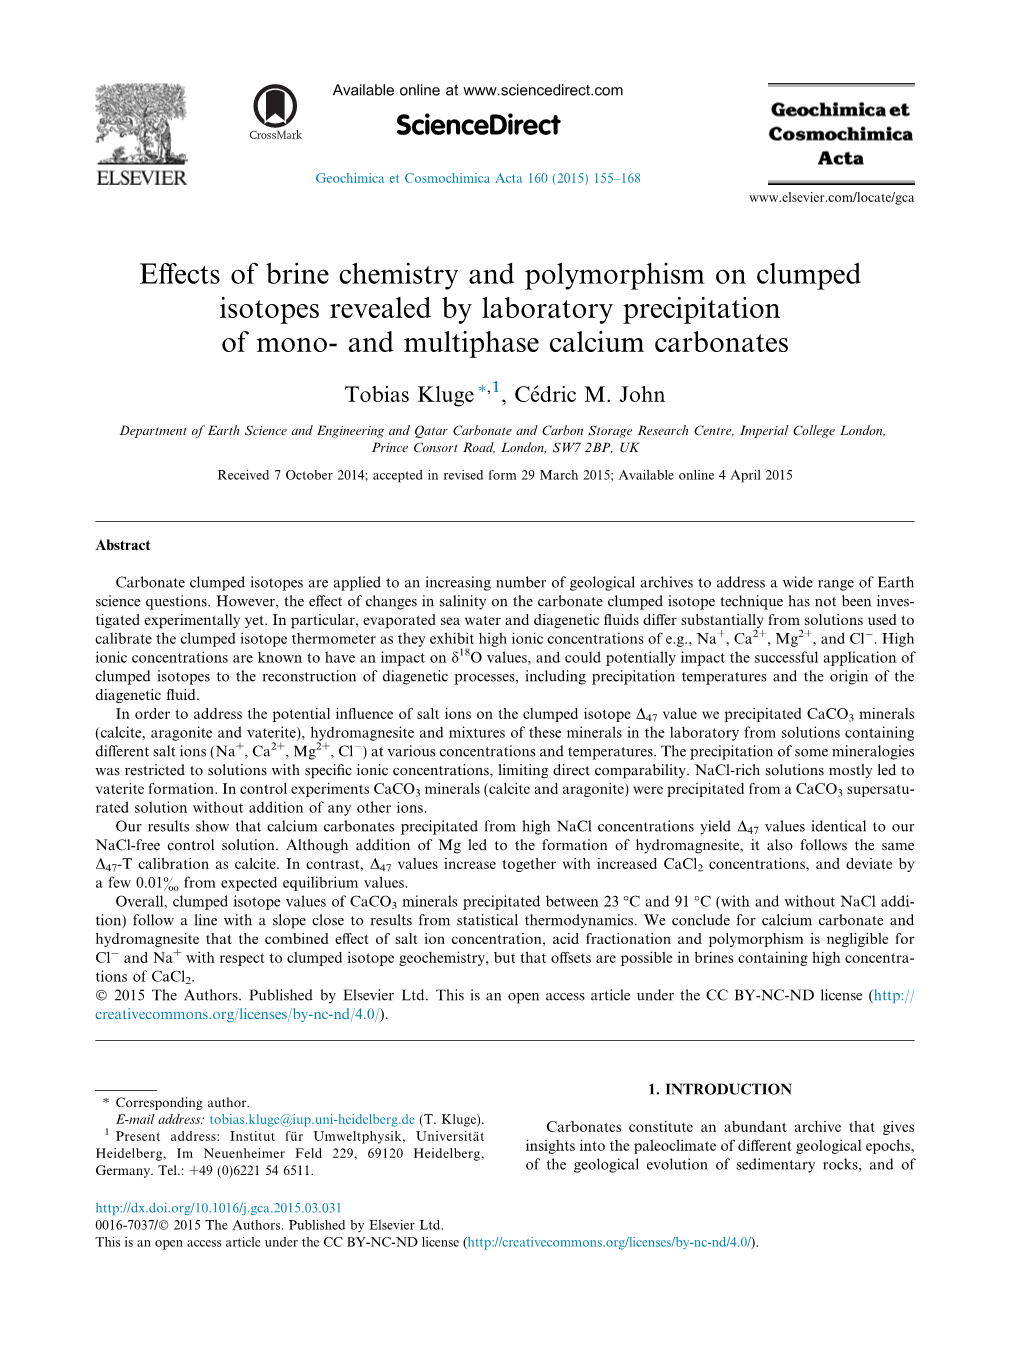 Effects of Brine Chemistry and Polymorphism on Clumped Isotopes